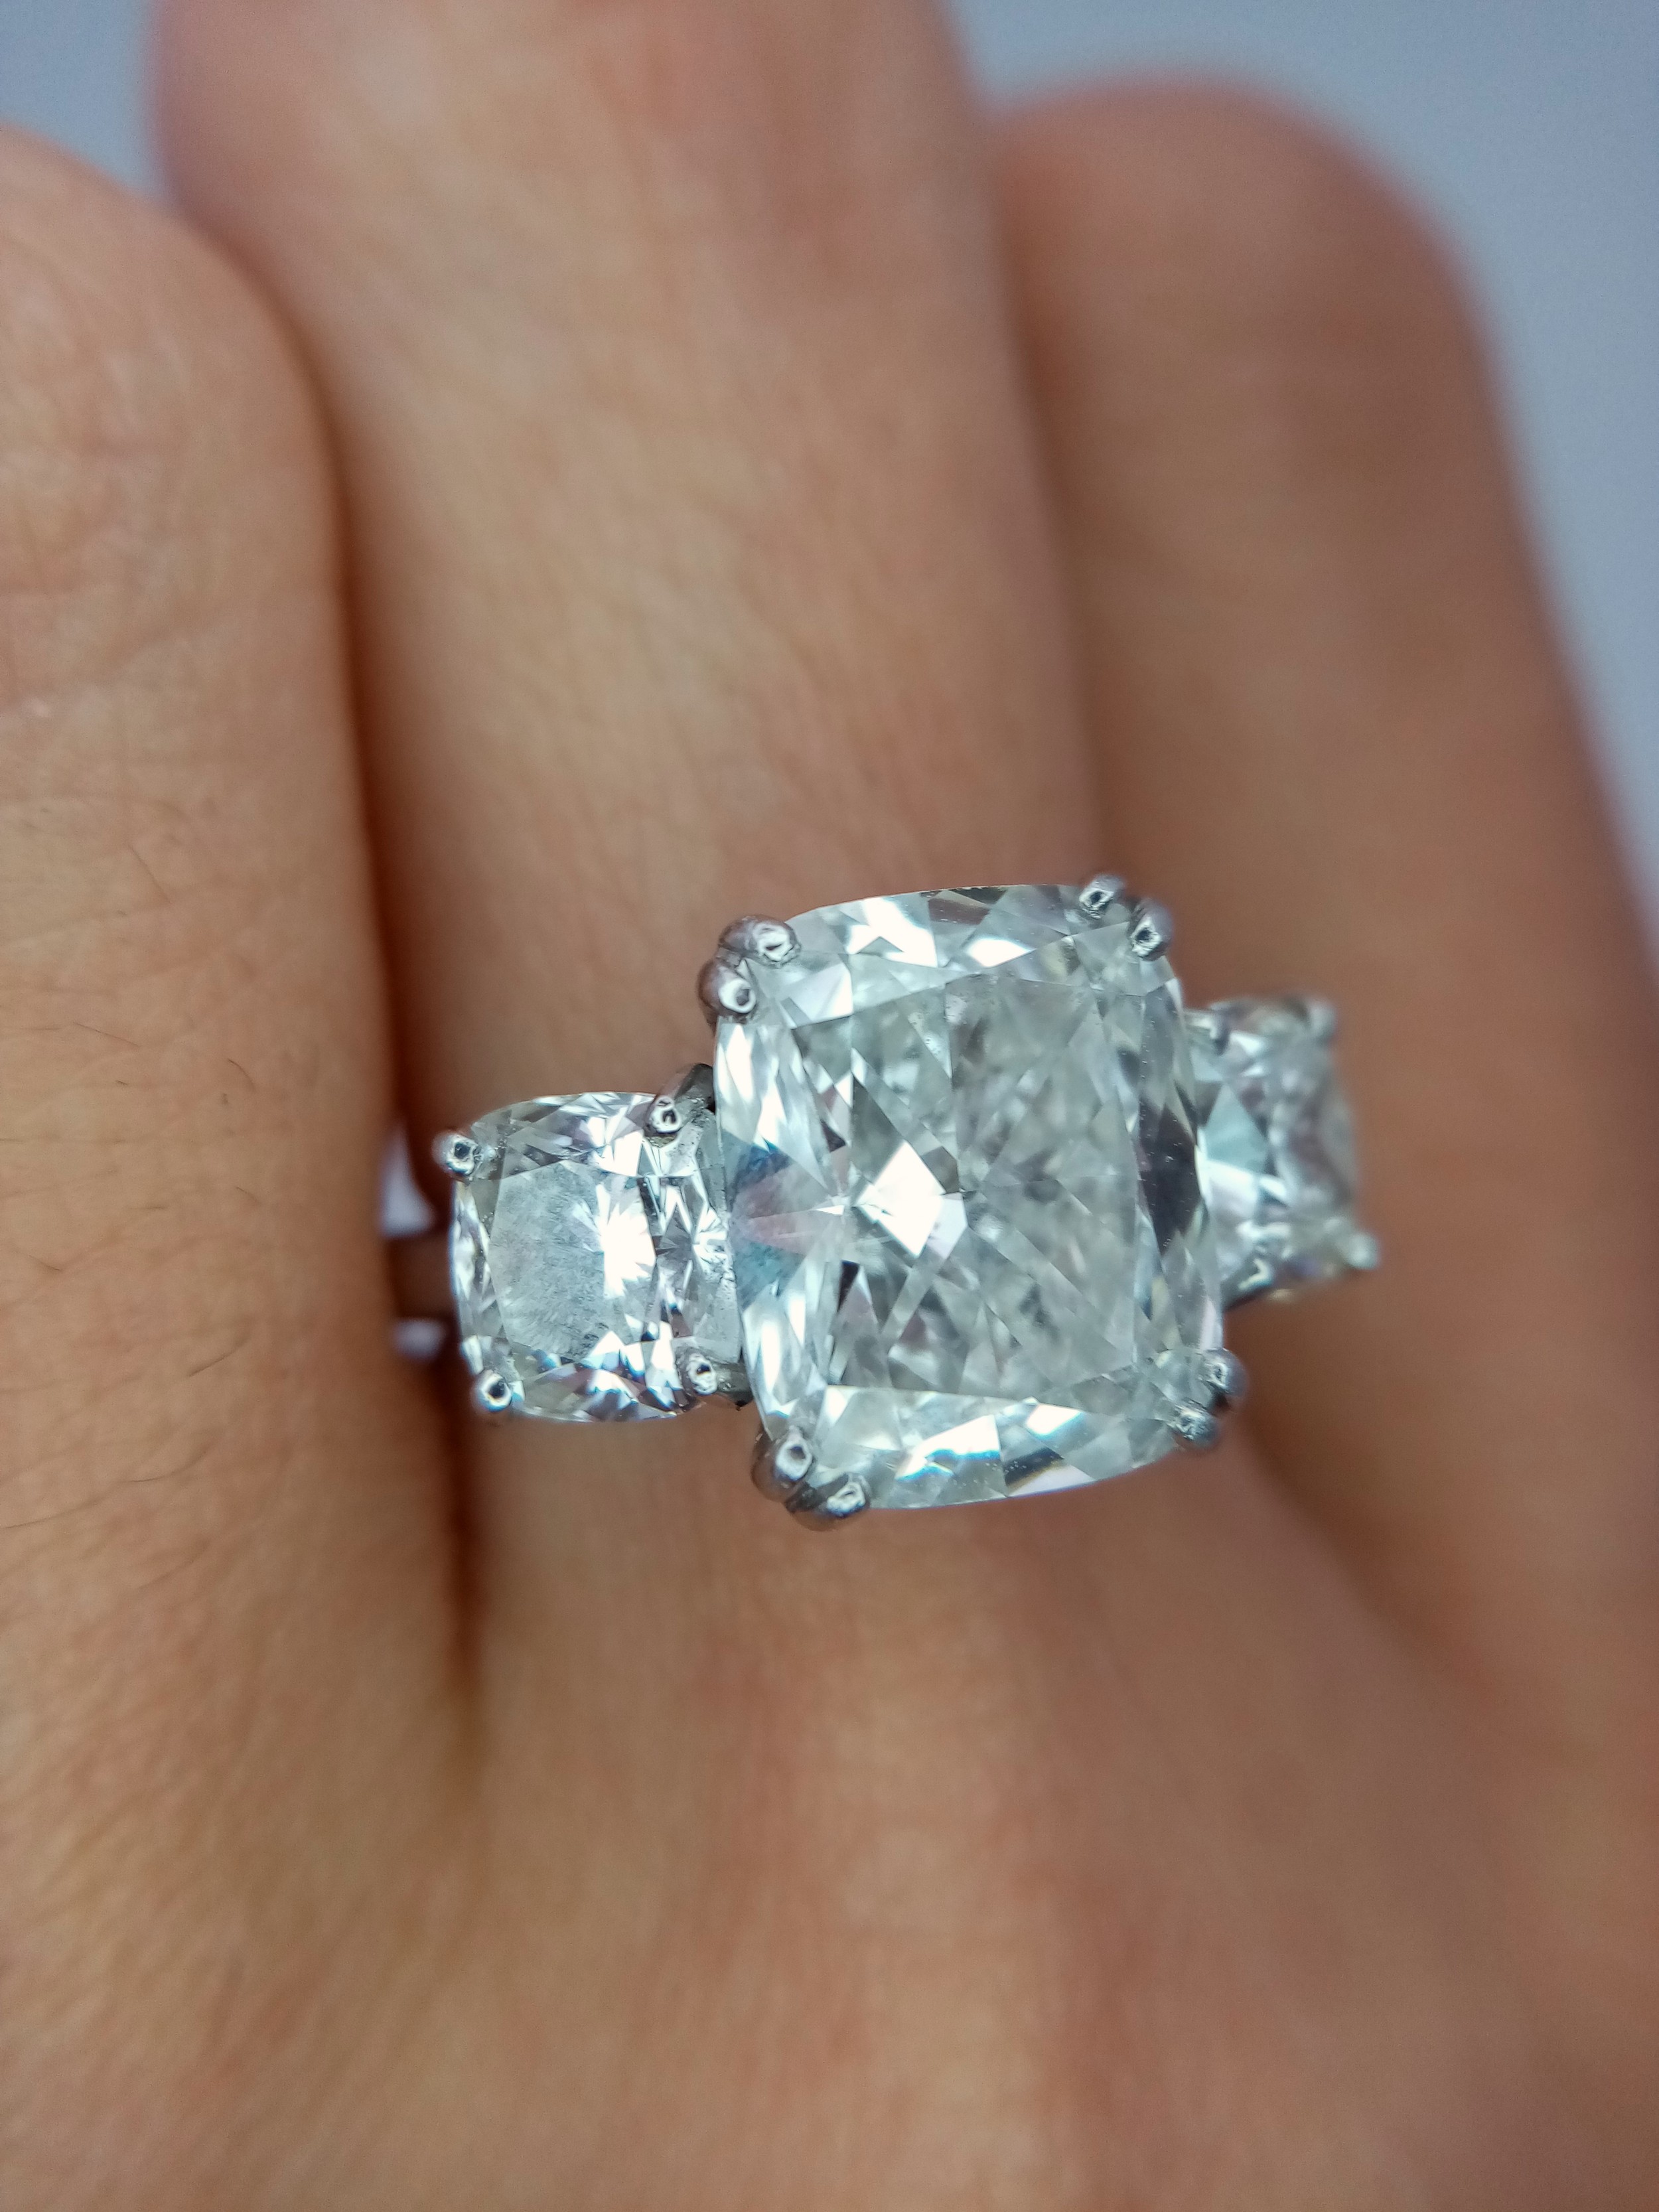 A Breathtaking 4.01ct GIA Certified Diamond Ring. A brilliant cushion cut 4.01ct central diamond - Image 22 of 22